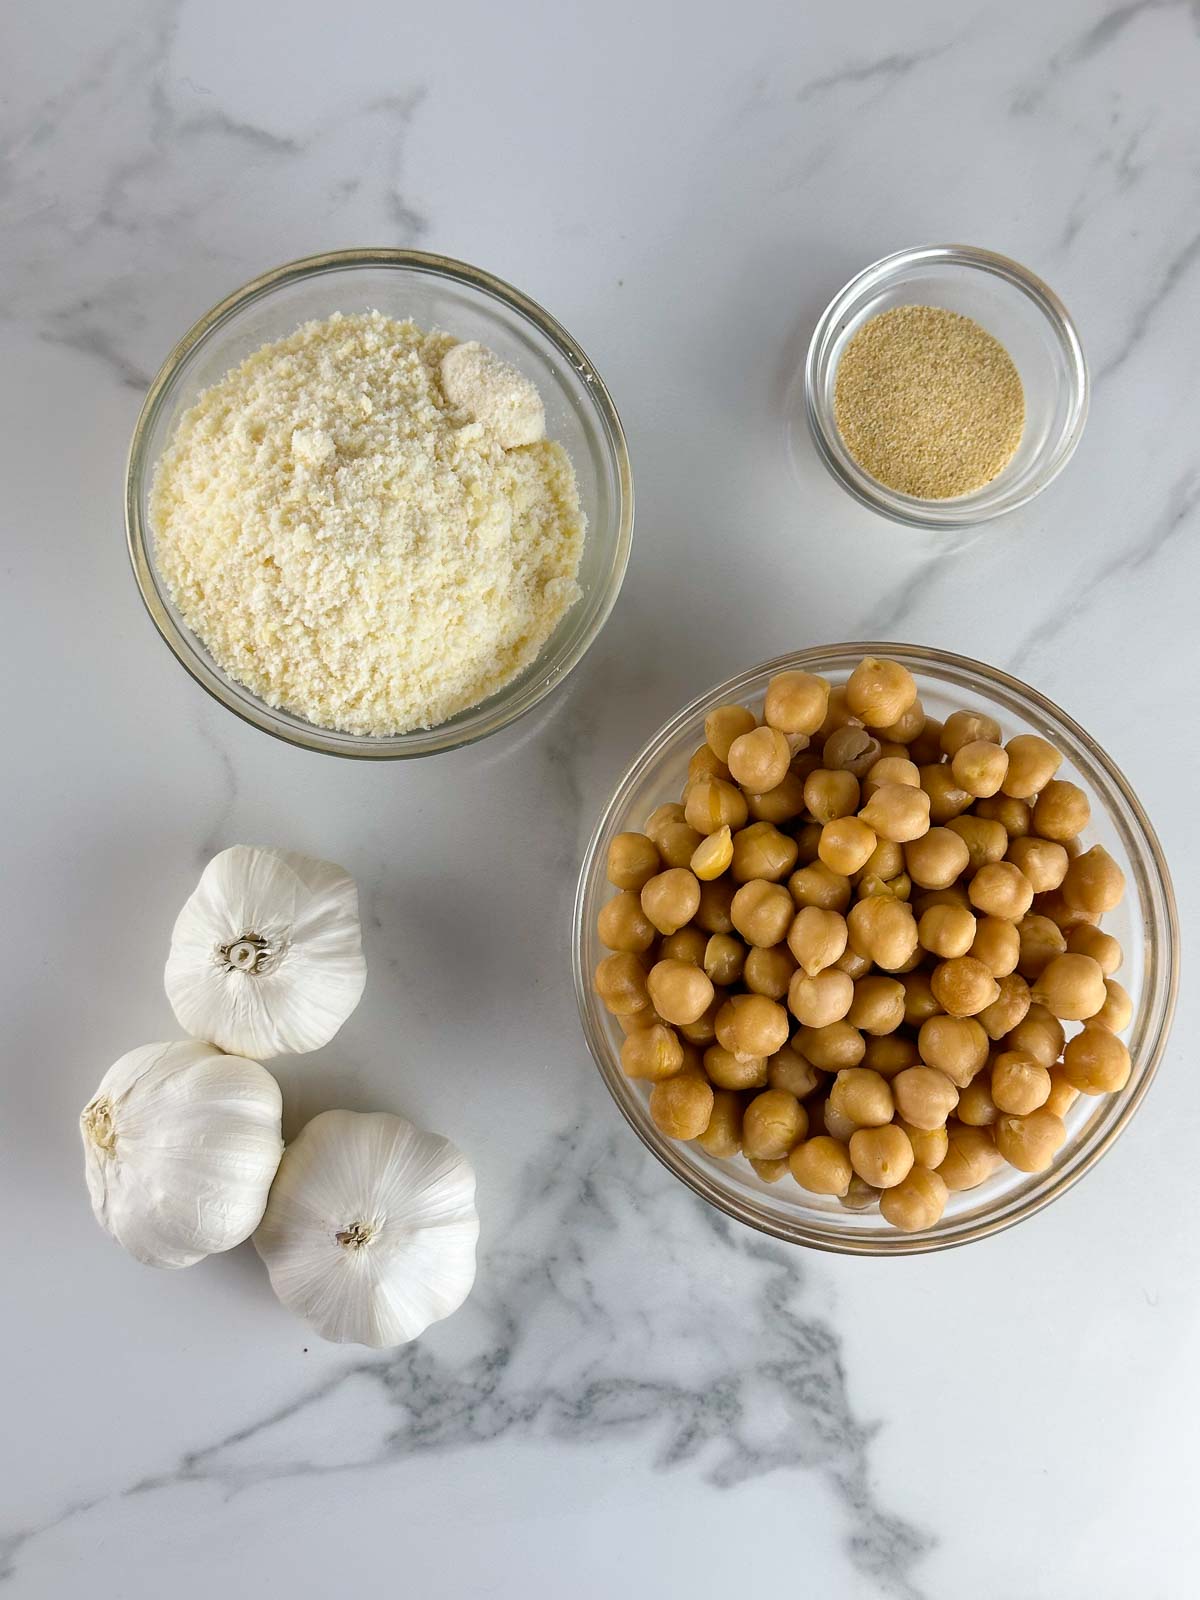 Ingredients for Easy Garlic Roasted Chickpeas with Parmesan: Chickpeas, Garlic Powder, and Parmesan Cheese